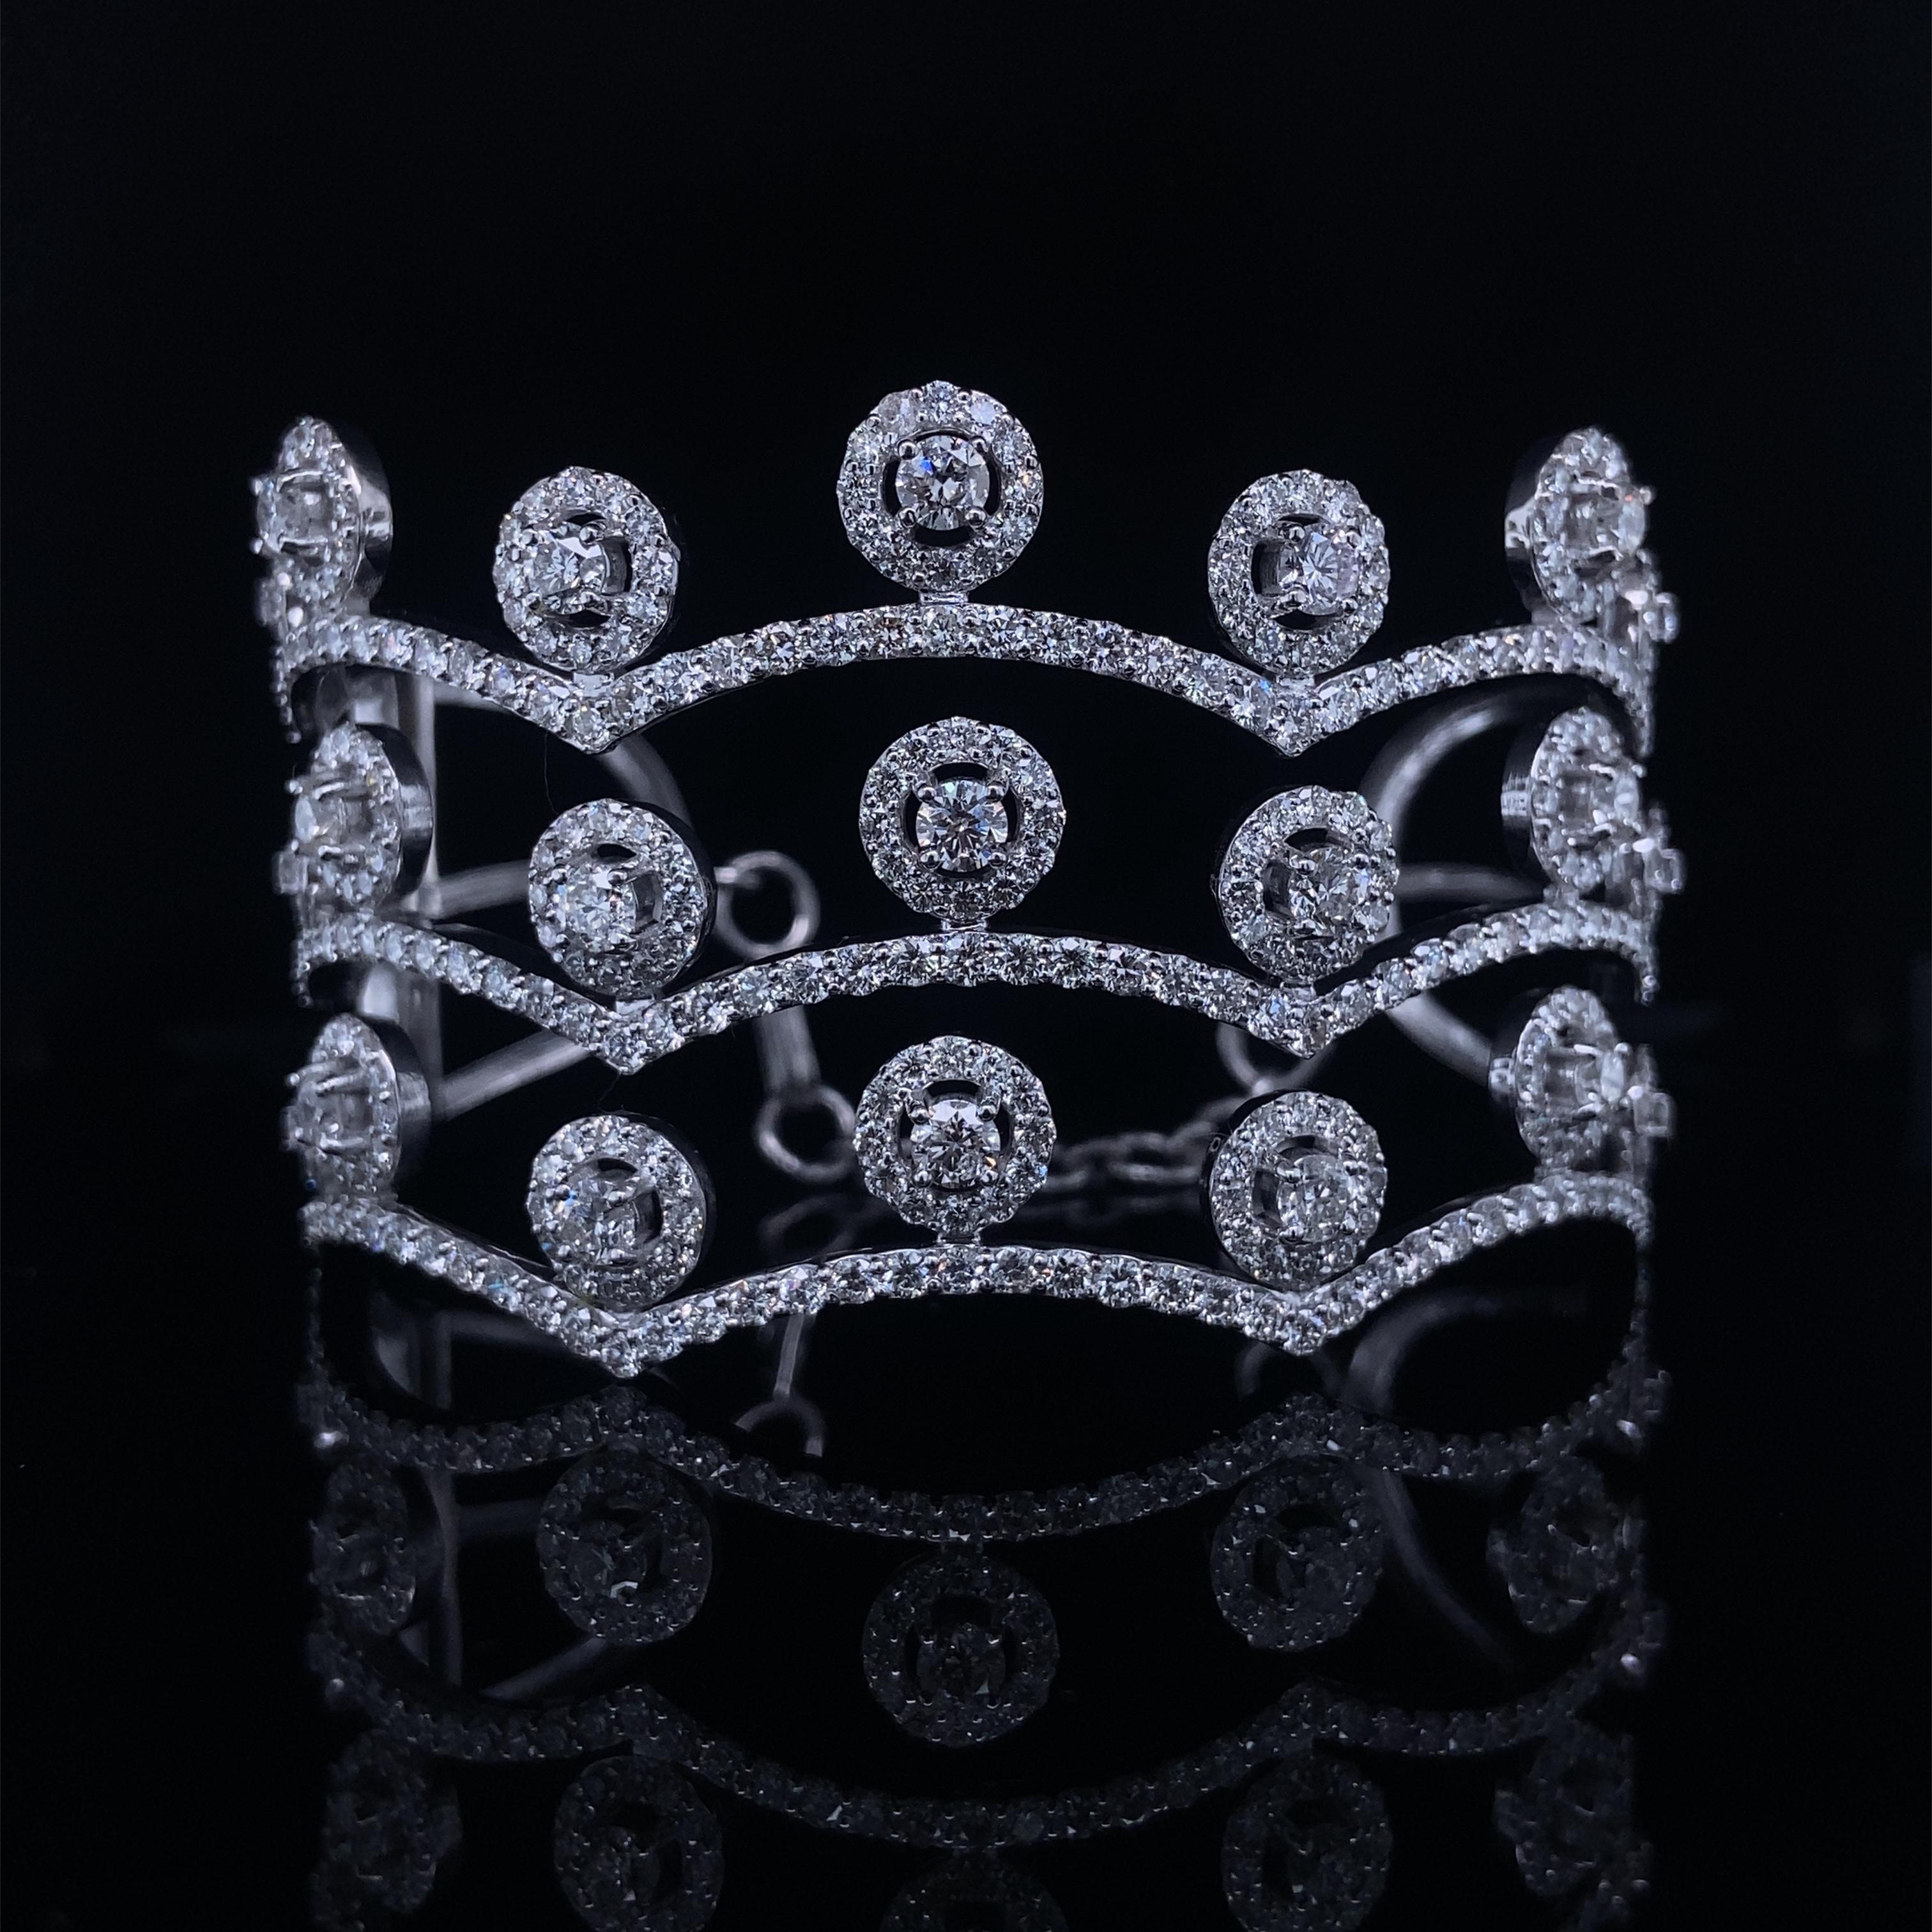 The Crown Shaped Diamond Cuff Bracelet is an exquisite piece of jewelry crafted with elegance. It features a stunning crown design meticulously set with sparkling diamonds, creating a regal and luxurious appearance. The bracelet is expertly crafted